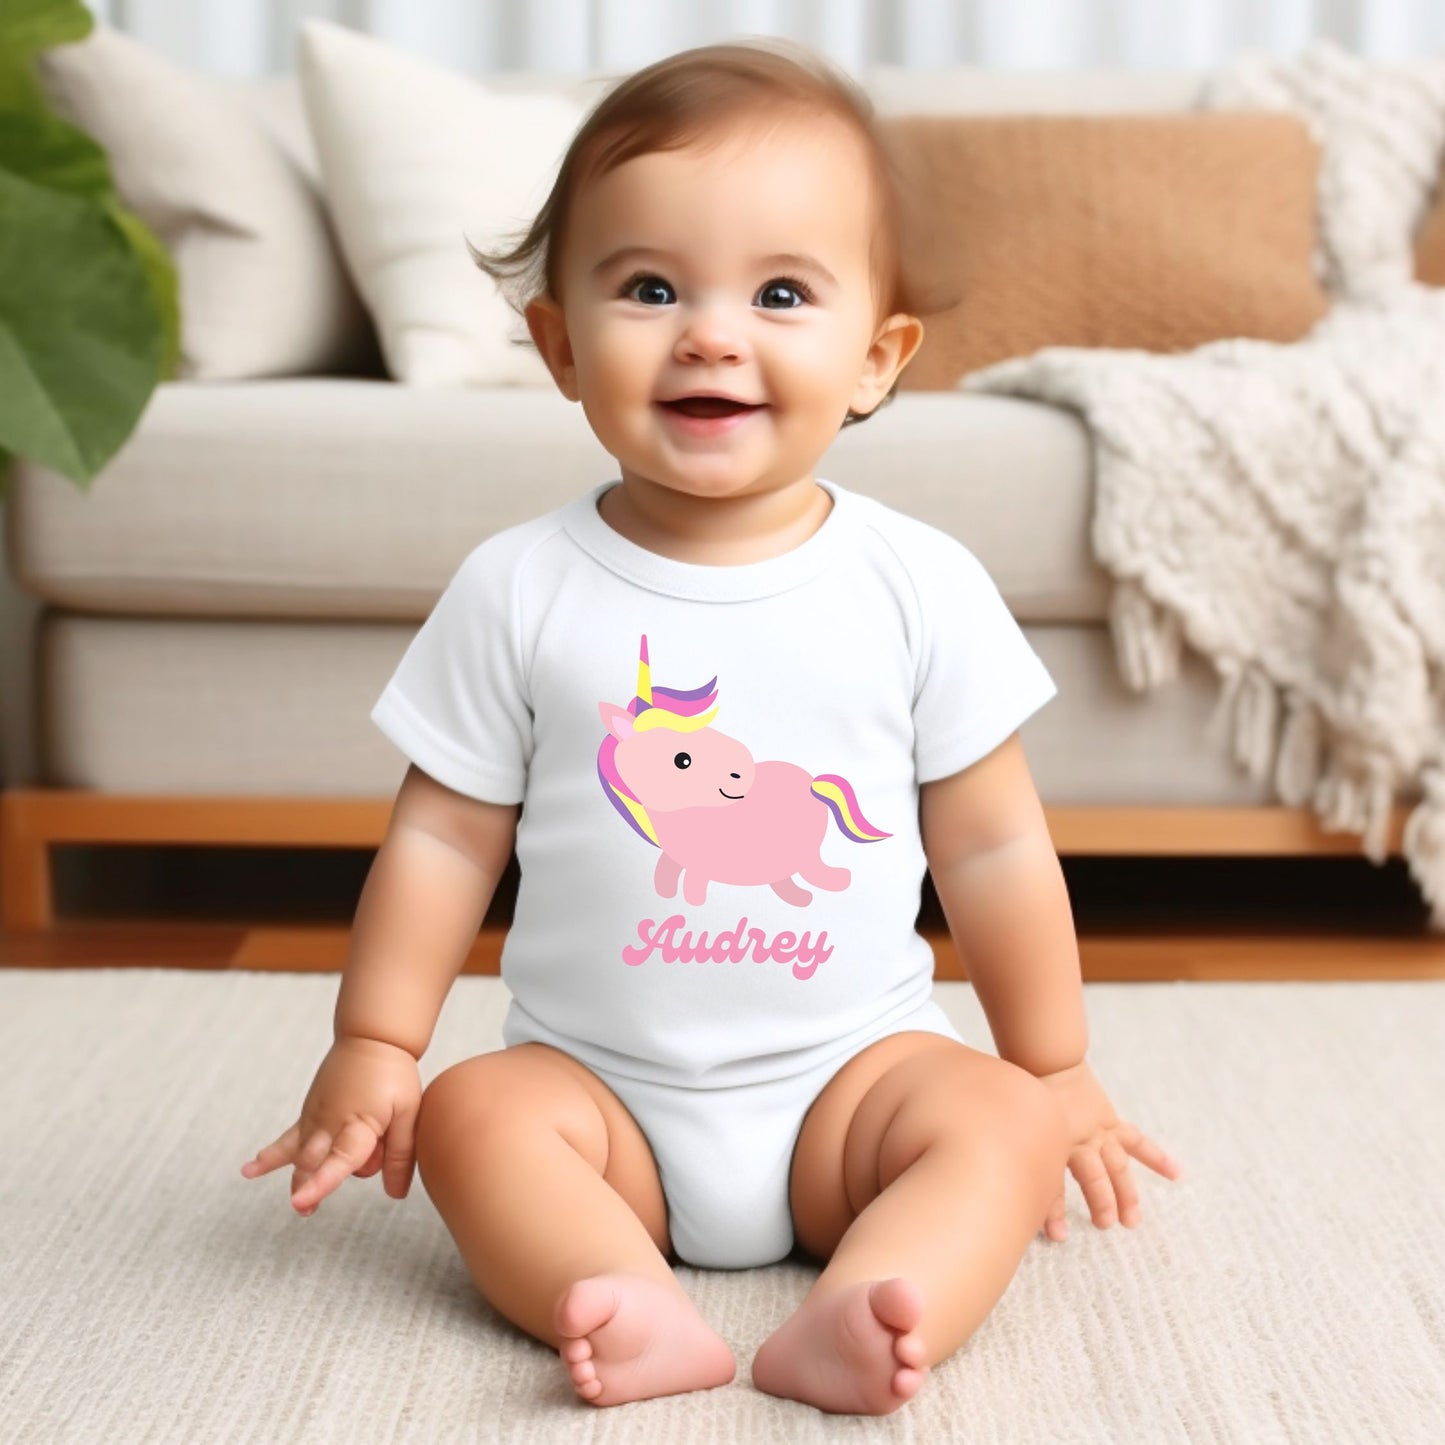 Personalized "Magical Moments" Unicorn Baby Romper